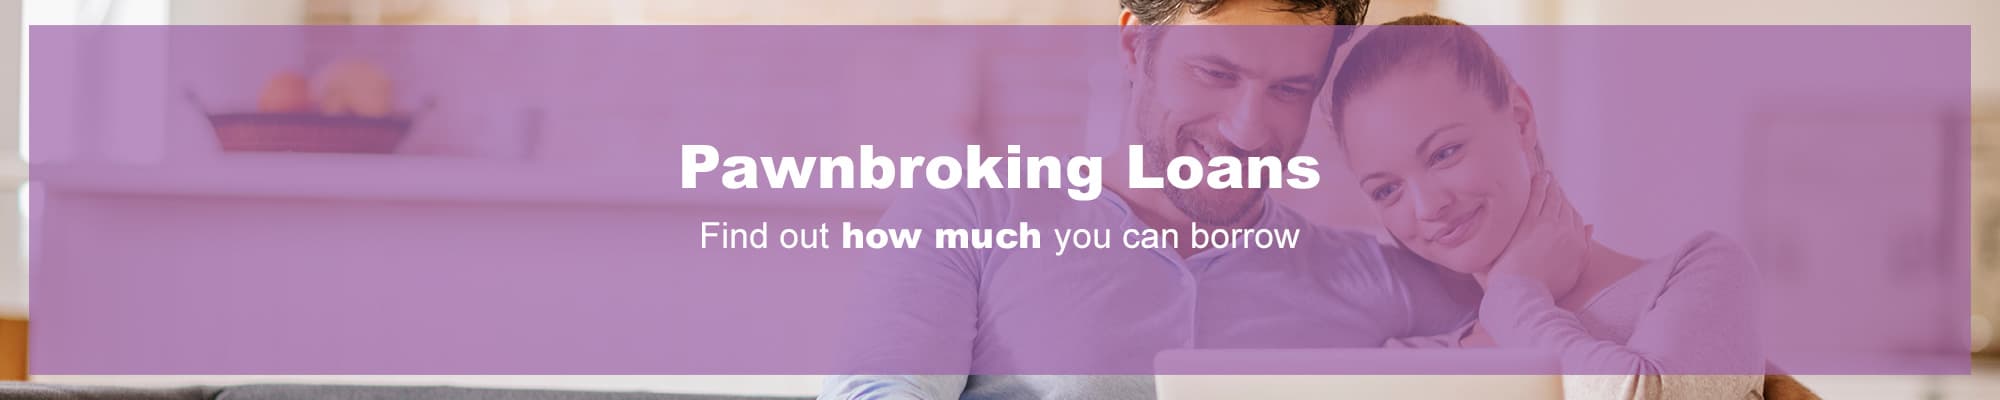 Find out how much you can borrow